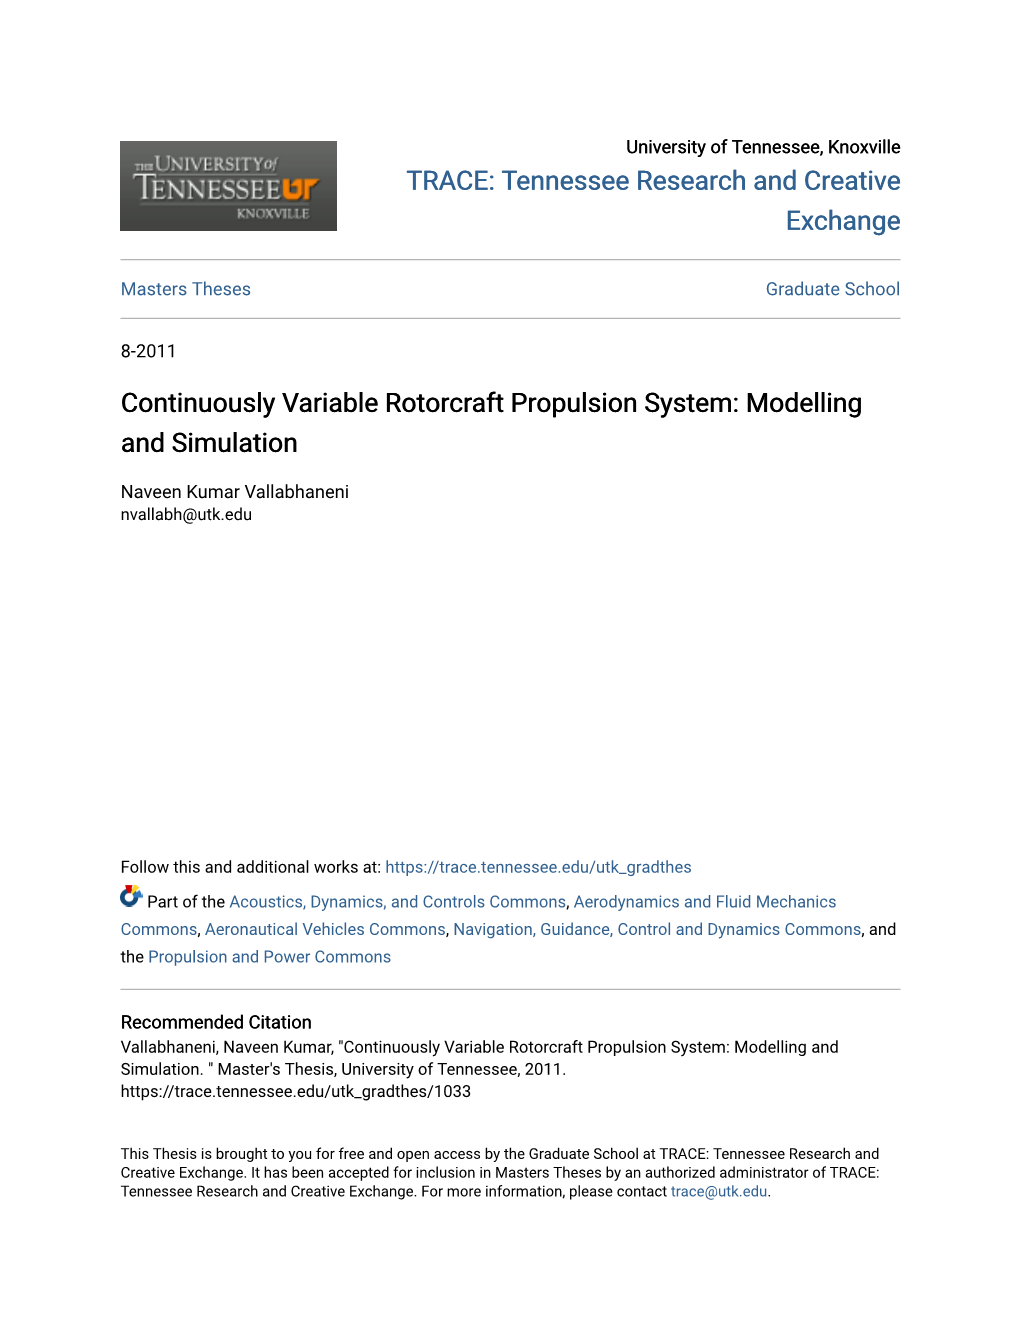 Continuously Variable Rotorcraft Propulsion System: Modelling and Simulation